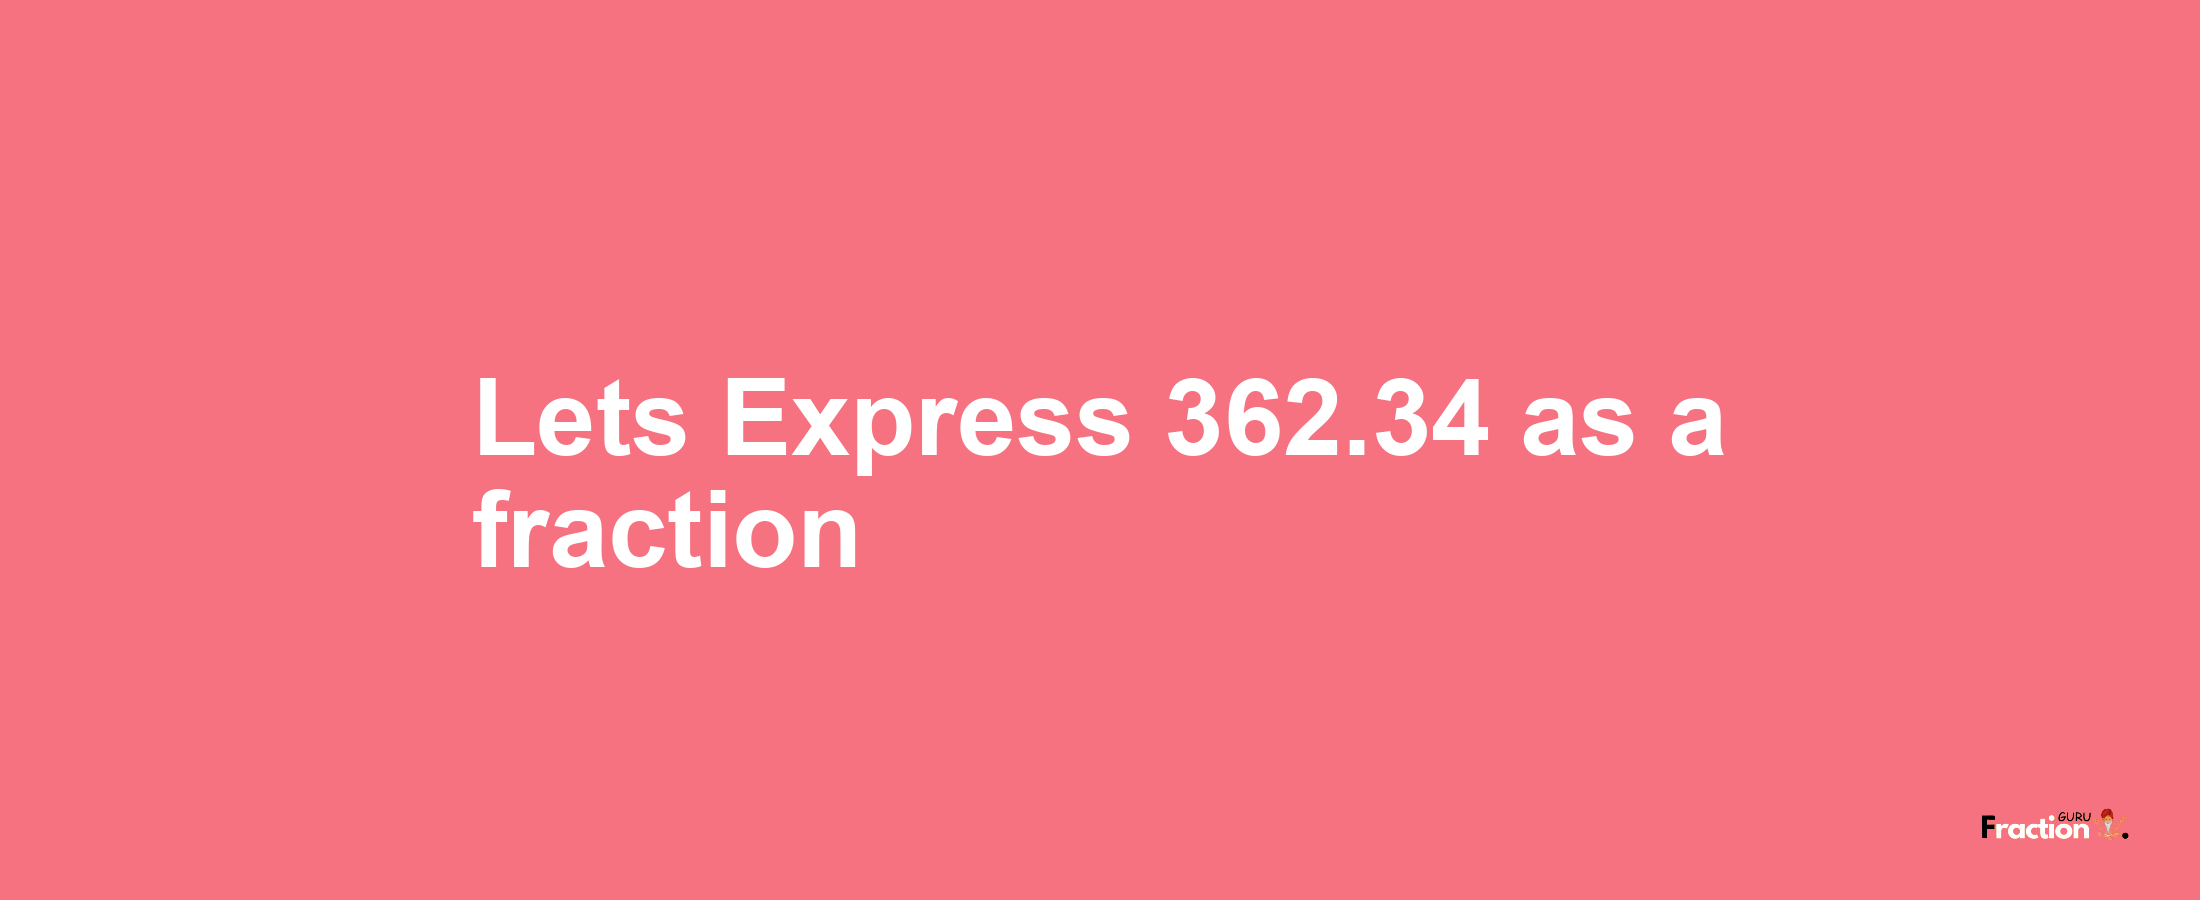 Lets Express 362.34 as afraction